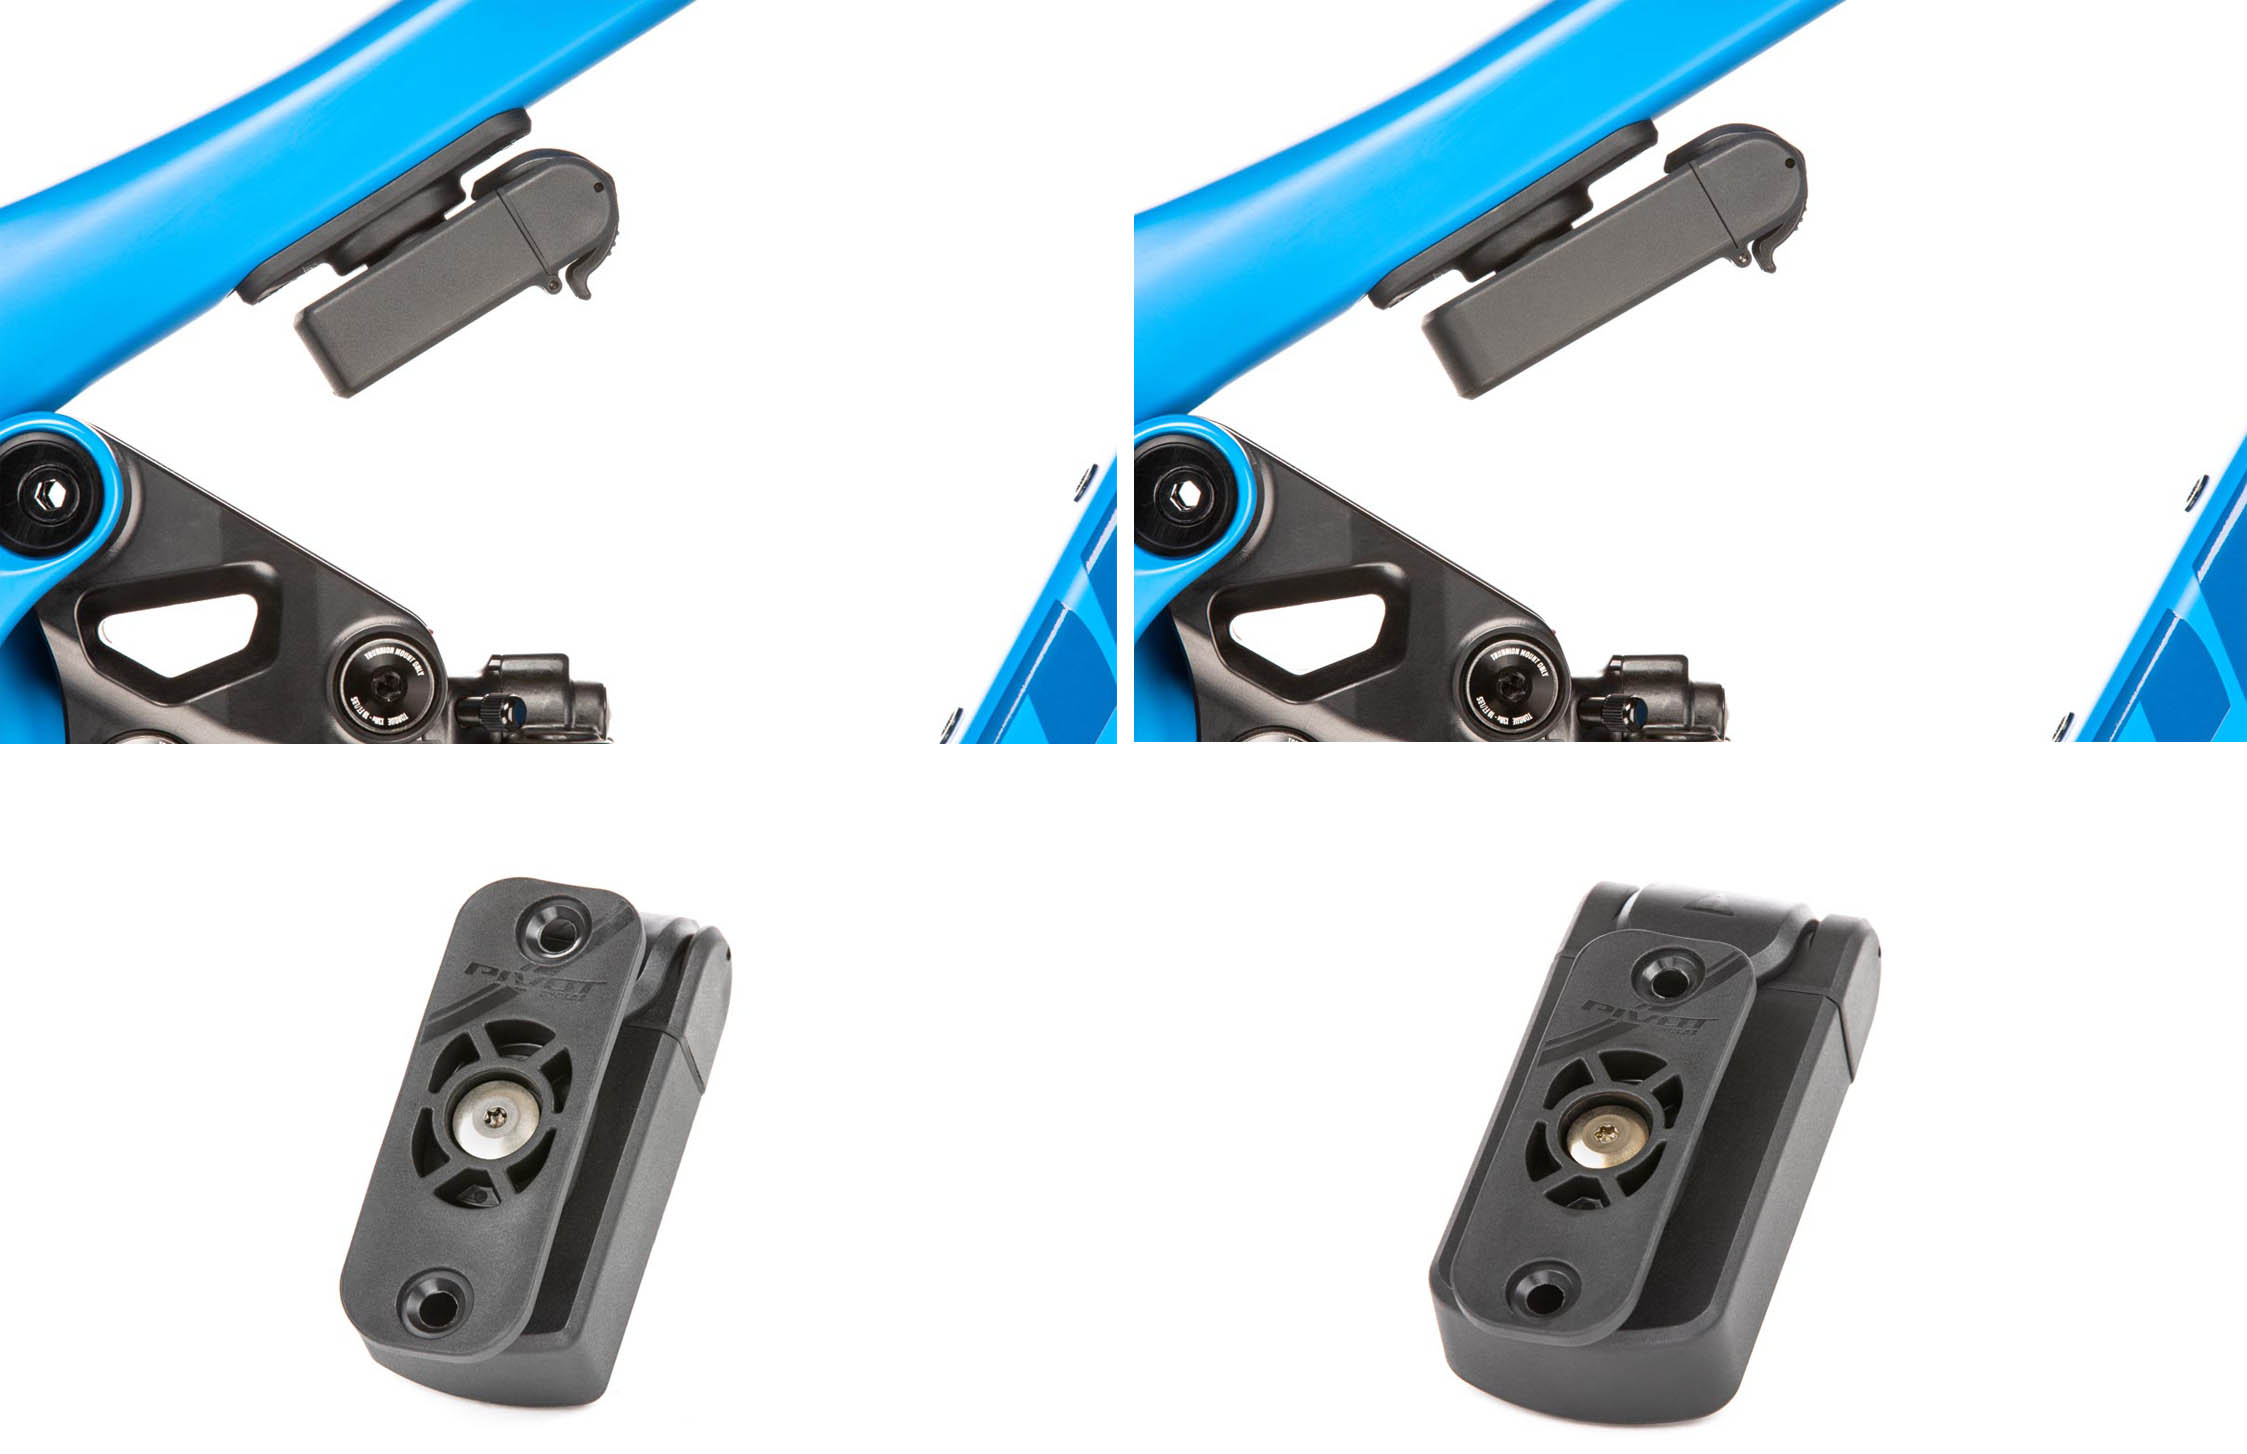 Fix it fast with the new Phoenix Dock Tool System from Pivot x Topeak